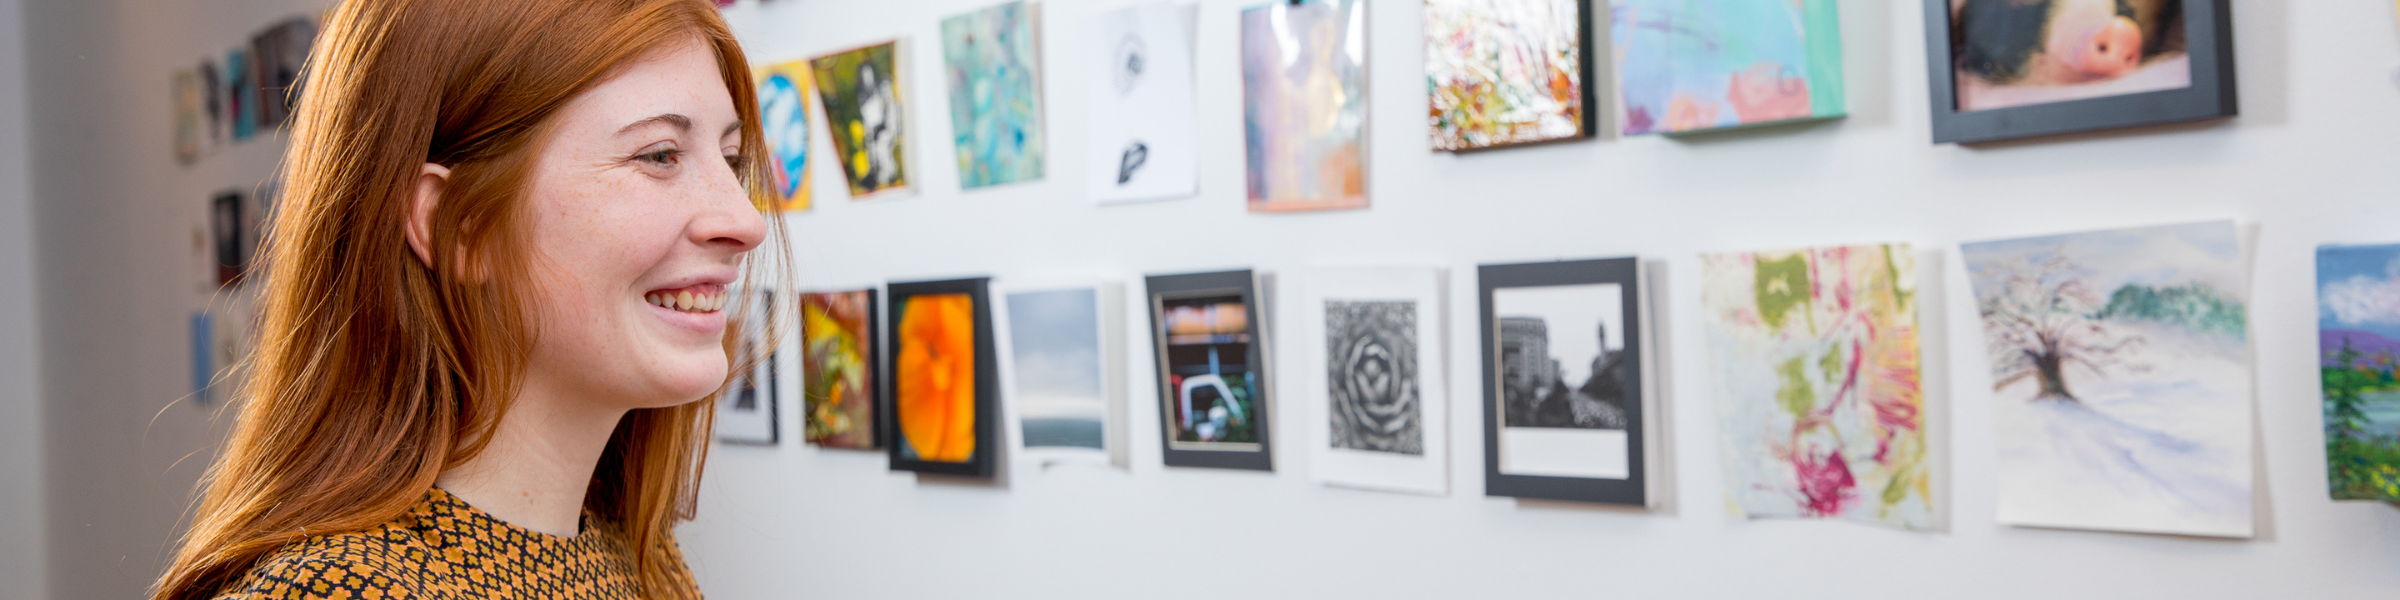 Woman looking at small paintings mounted on wall